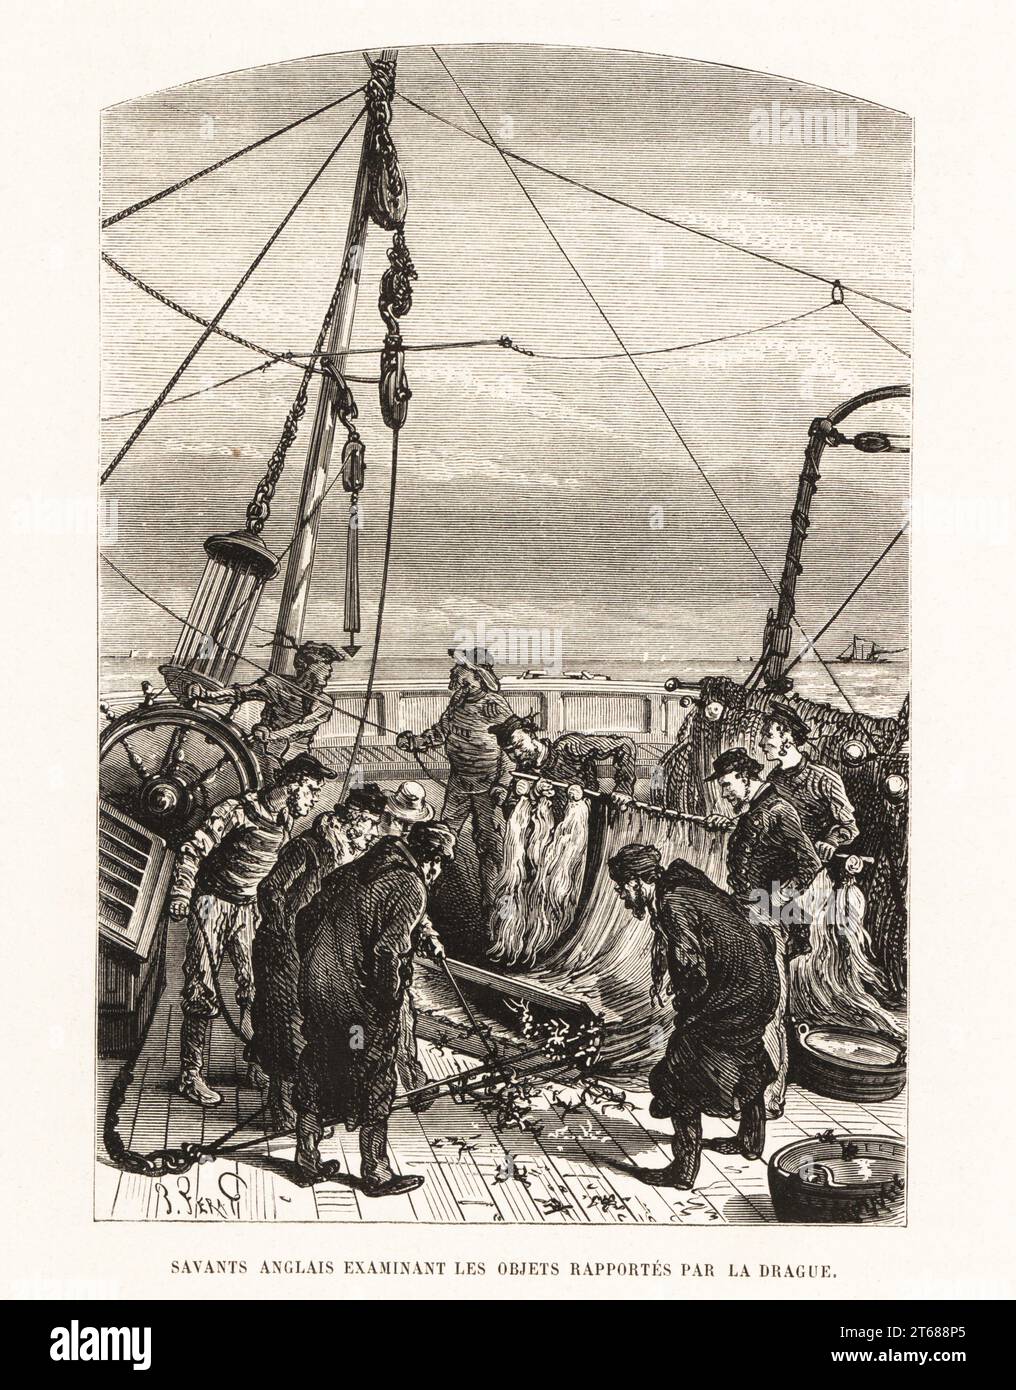 English sailors examining objects dredged from the sea. Fishermen checking their catch. Savants anglais examinant les objets rapporte par la drague. Woodcut by Jules-Descartes Ferat from Alfred Fredols Le Monde de la Mer, the World of the Sea, edited by Olivier Fredol, Librairie Hachette et. Cie., Paris, 1881. Alfred Fredol was the pseudonym of French zoologist and botanist Alfred Moquin-Tandon, 1804-1863. Stock Photo